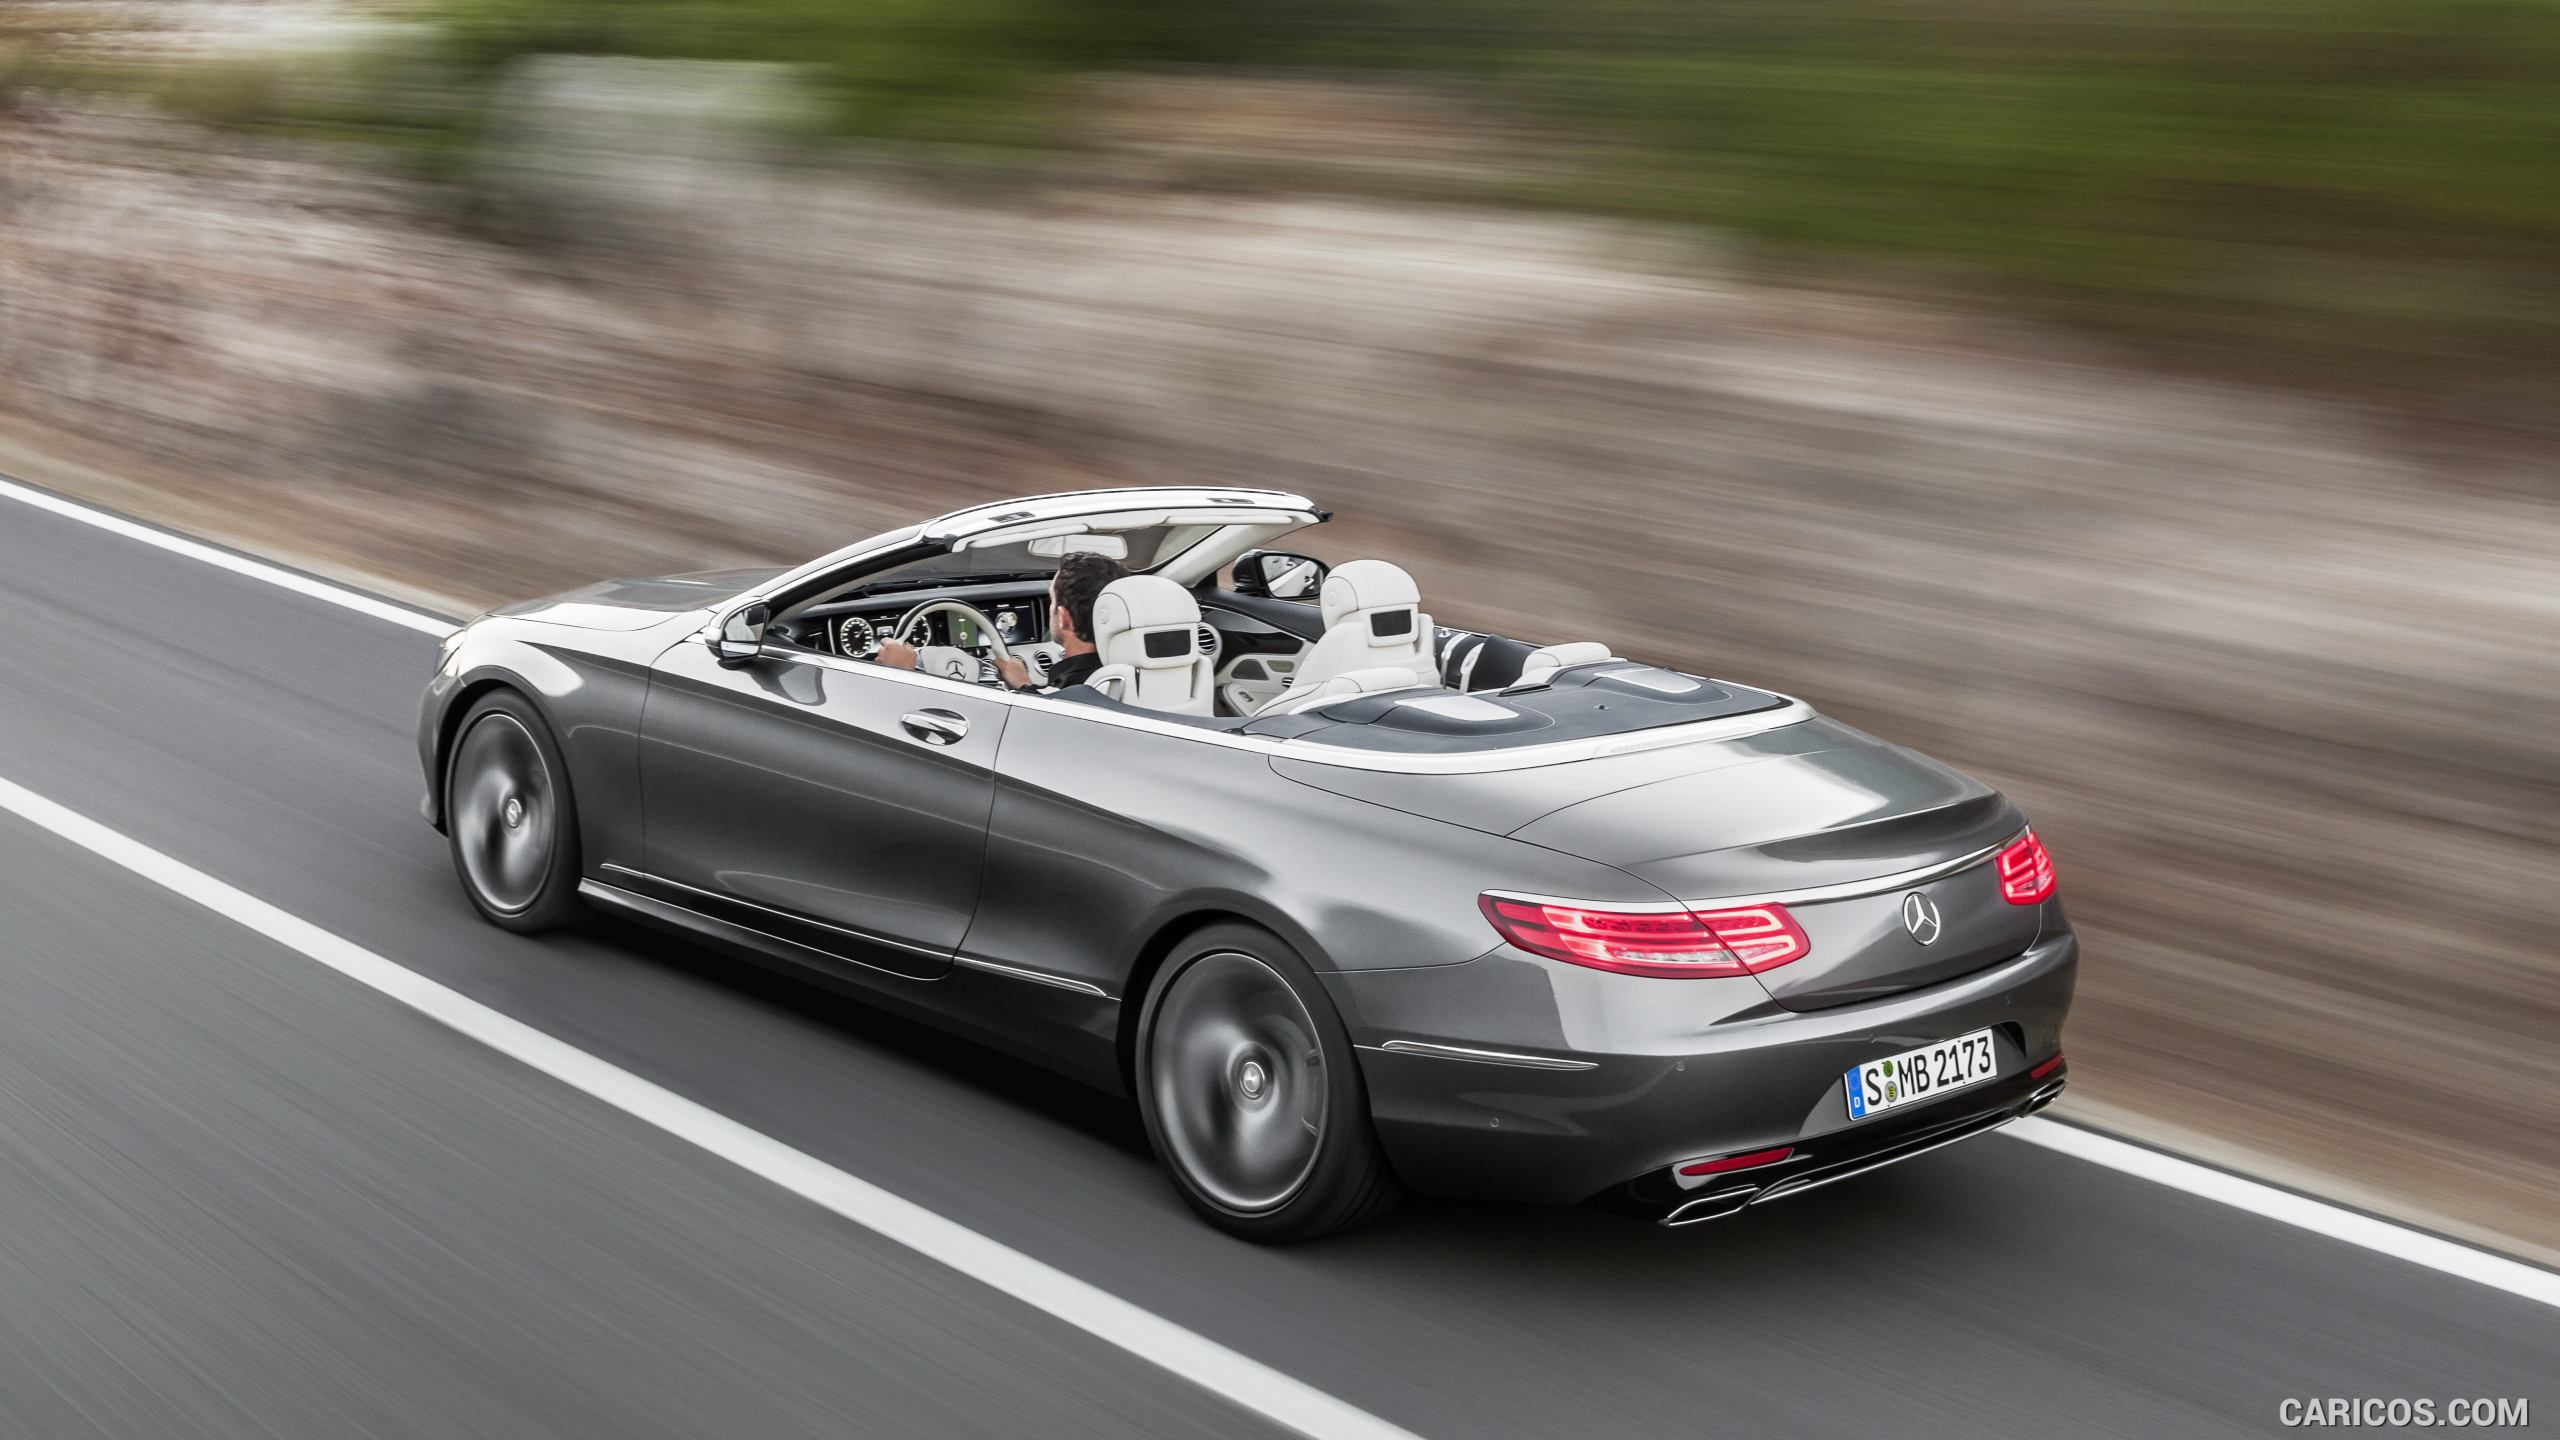 2017 Mercedes-Benz S-Class S500 Cabriolet (Selenit Grey) - Rear, #5 of 56